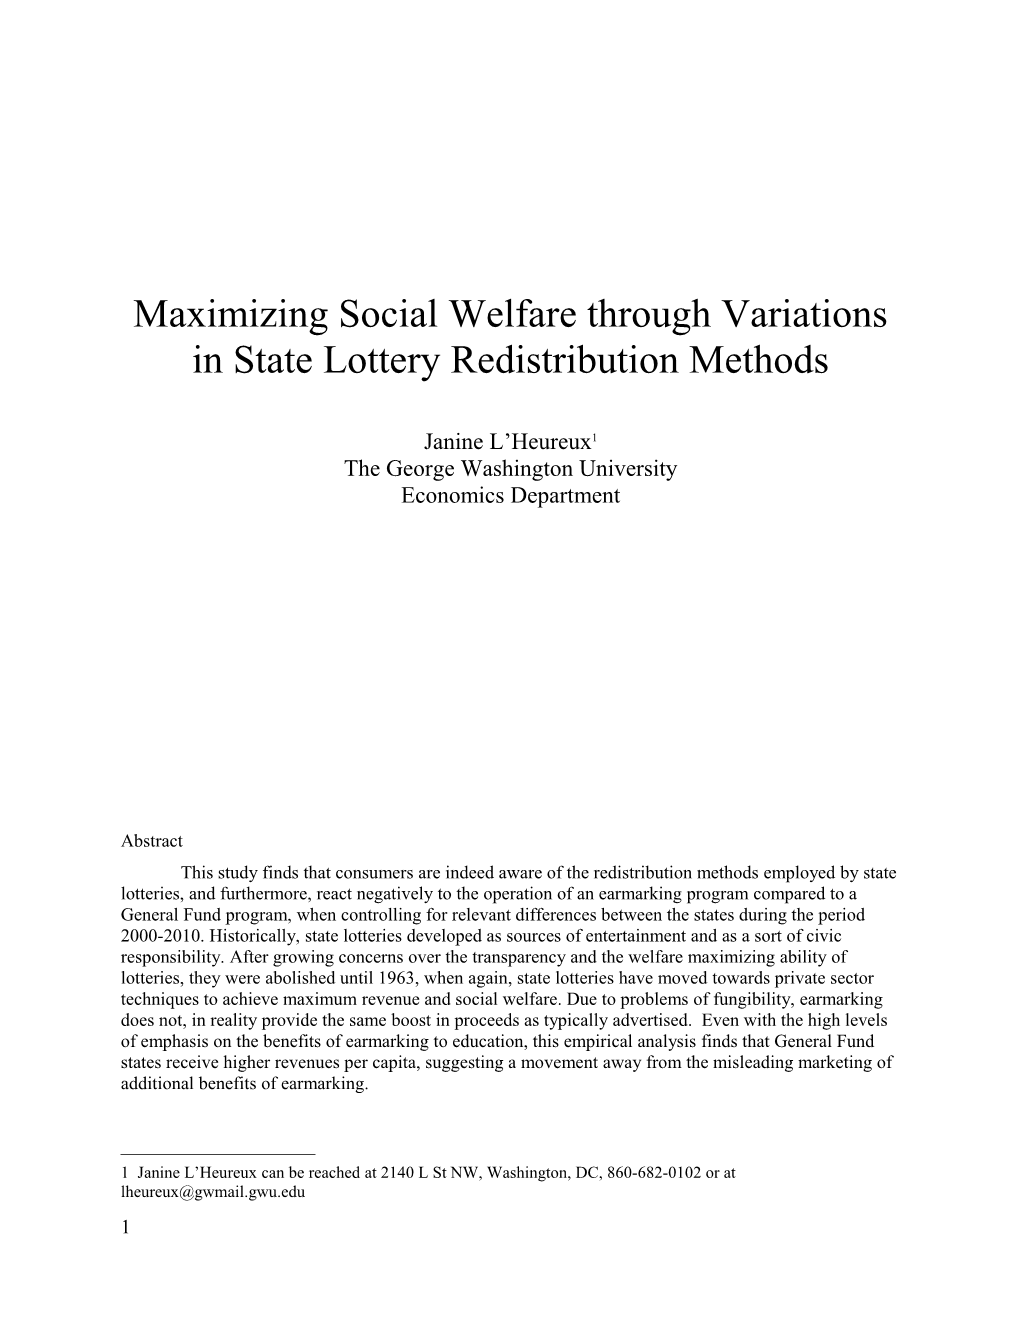 Maximizing Social Welfare Through Variations in State Lottery Redistribution Methods